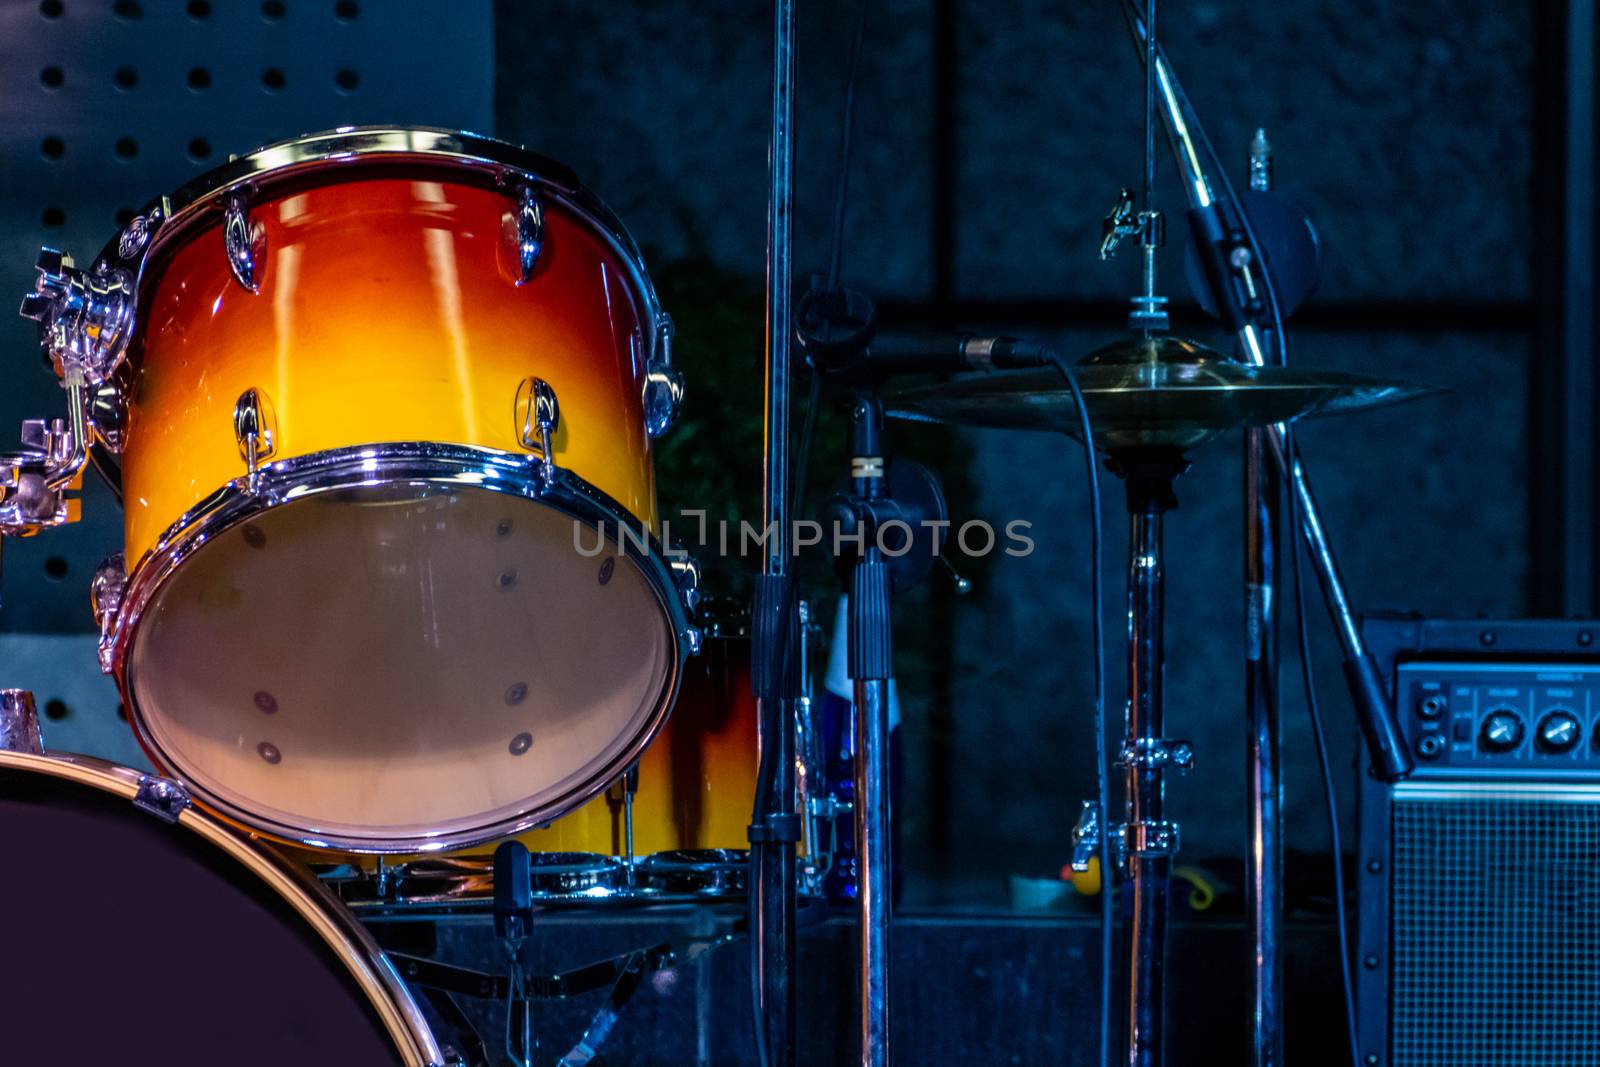 Close-up of colorful drums on stage by imagesbykenny